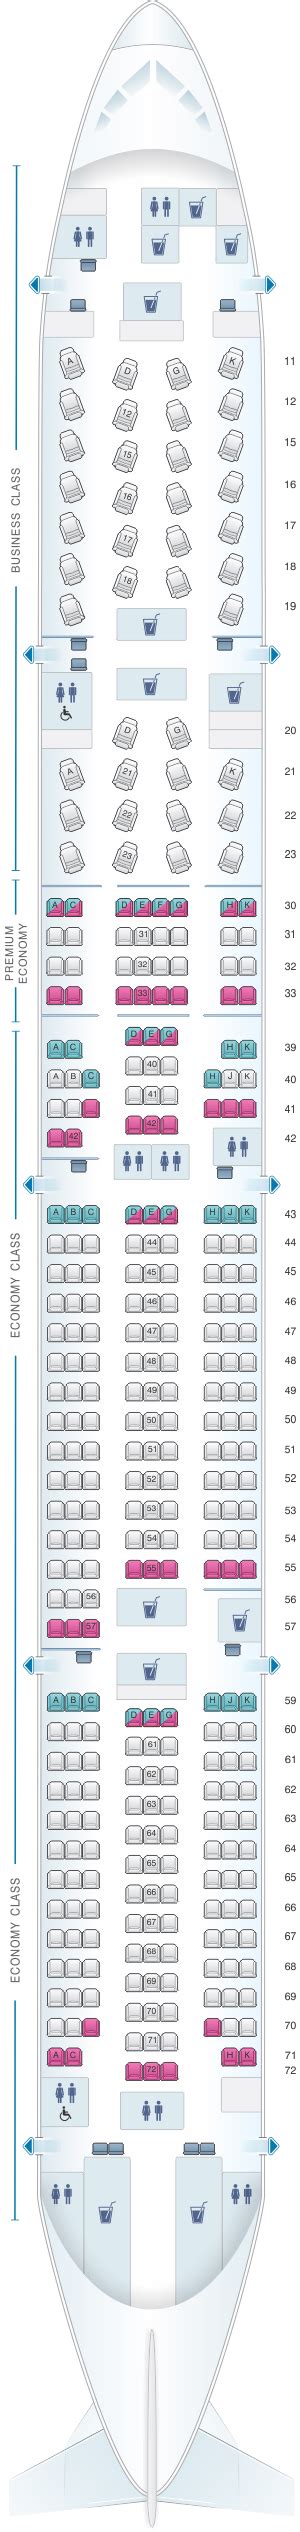 Cathay Pacific Plane Seating Plan